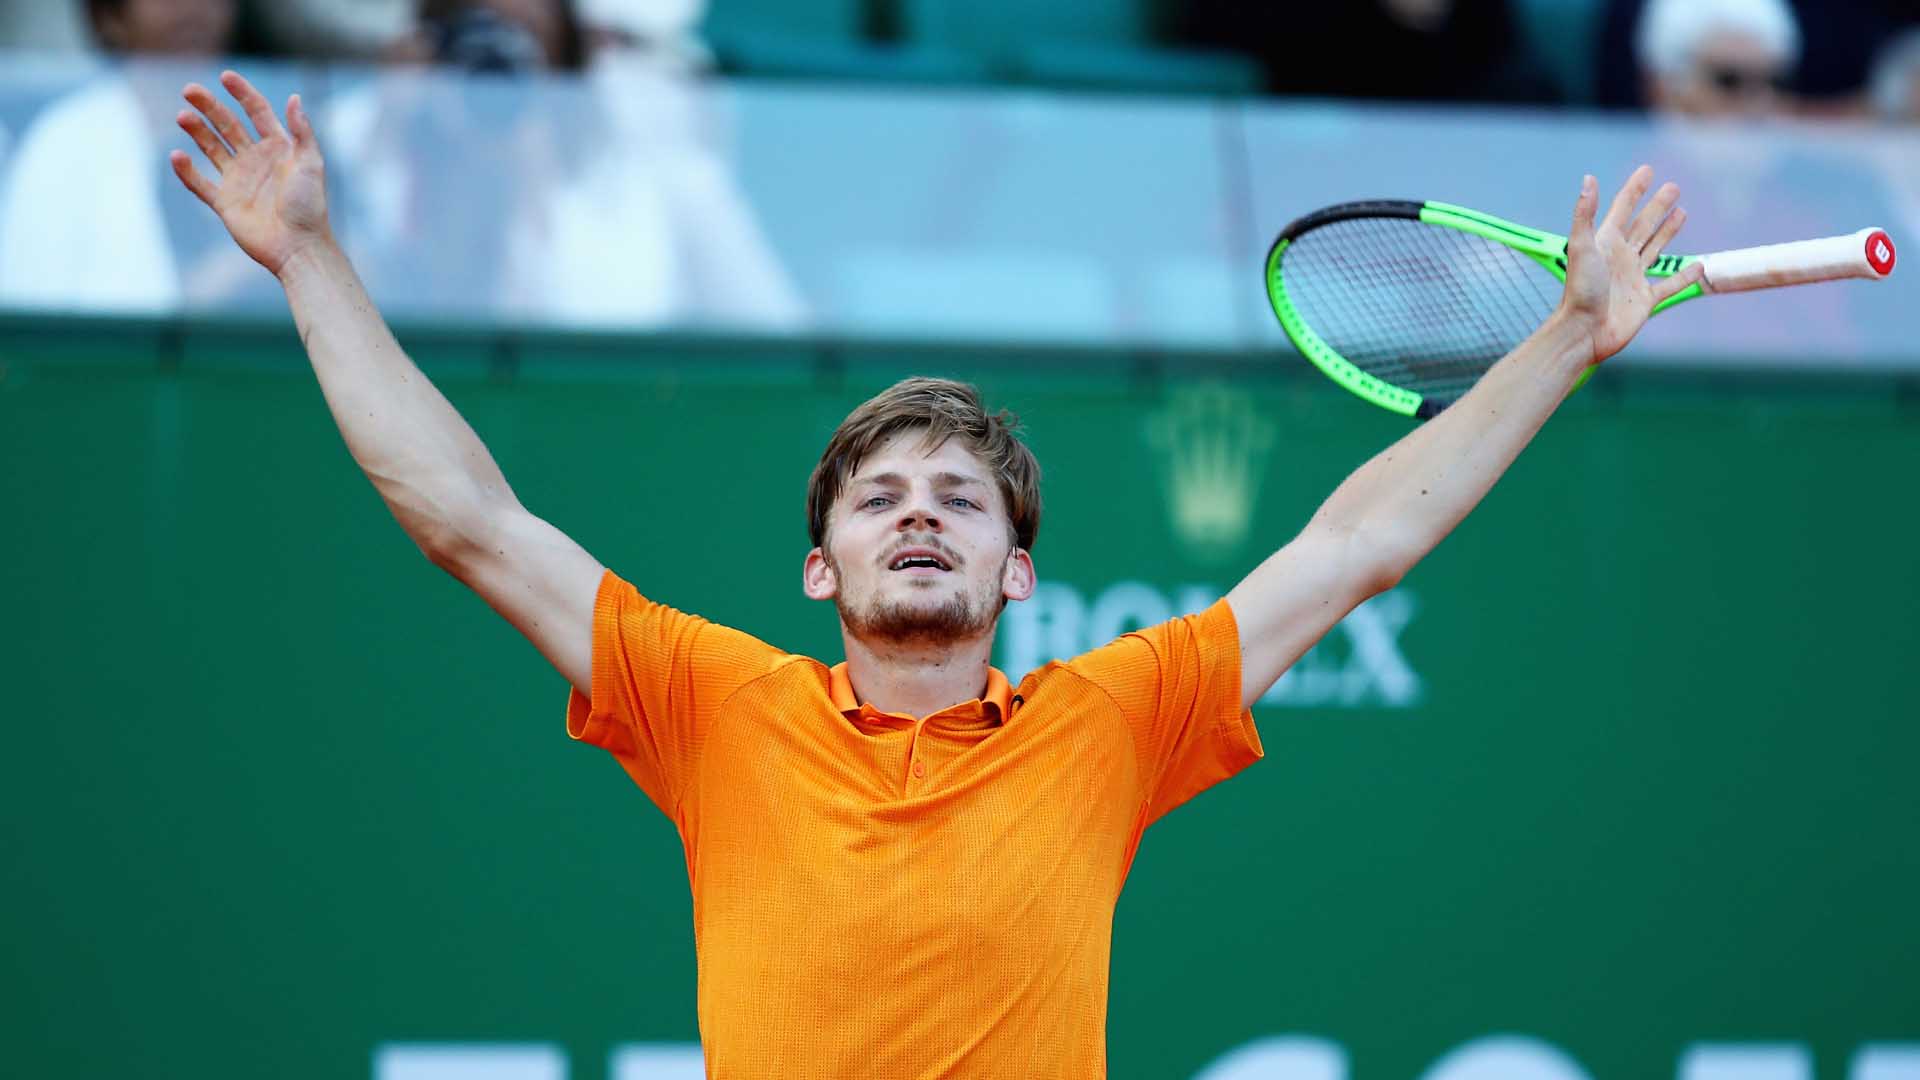 David Goffin defeated Novak Djokovic for the first time at the 2017 Rolex Monte-Carlo Masters.